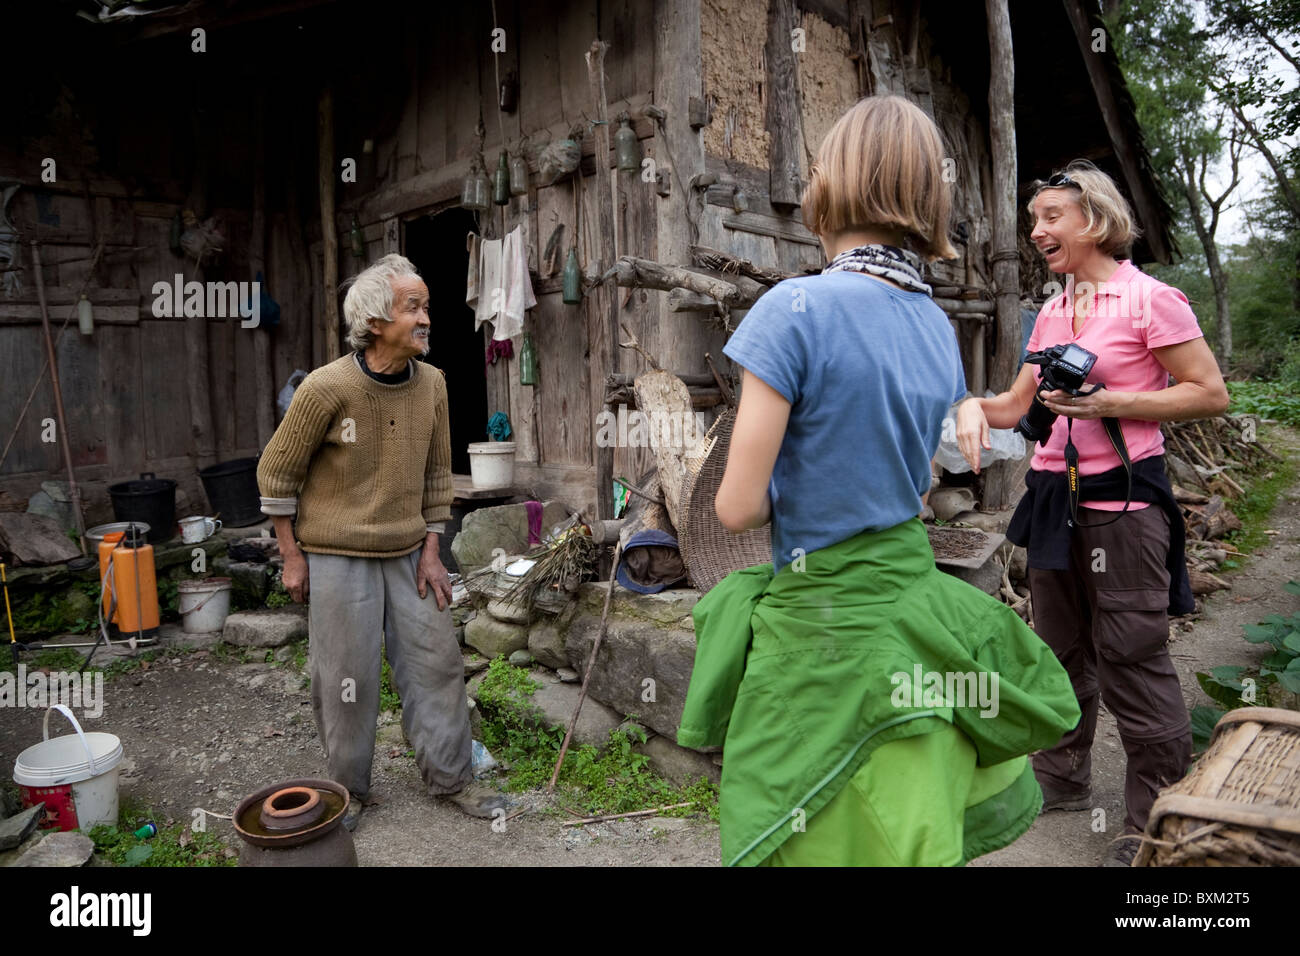 Western tourists interacting with an old Chinese man in a remote village in west China. Stock Photo